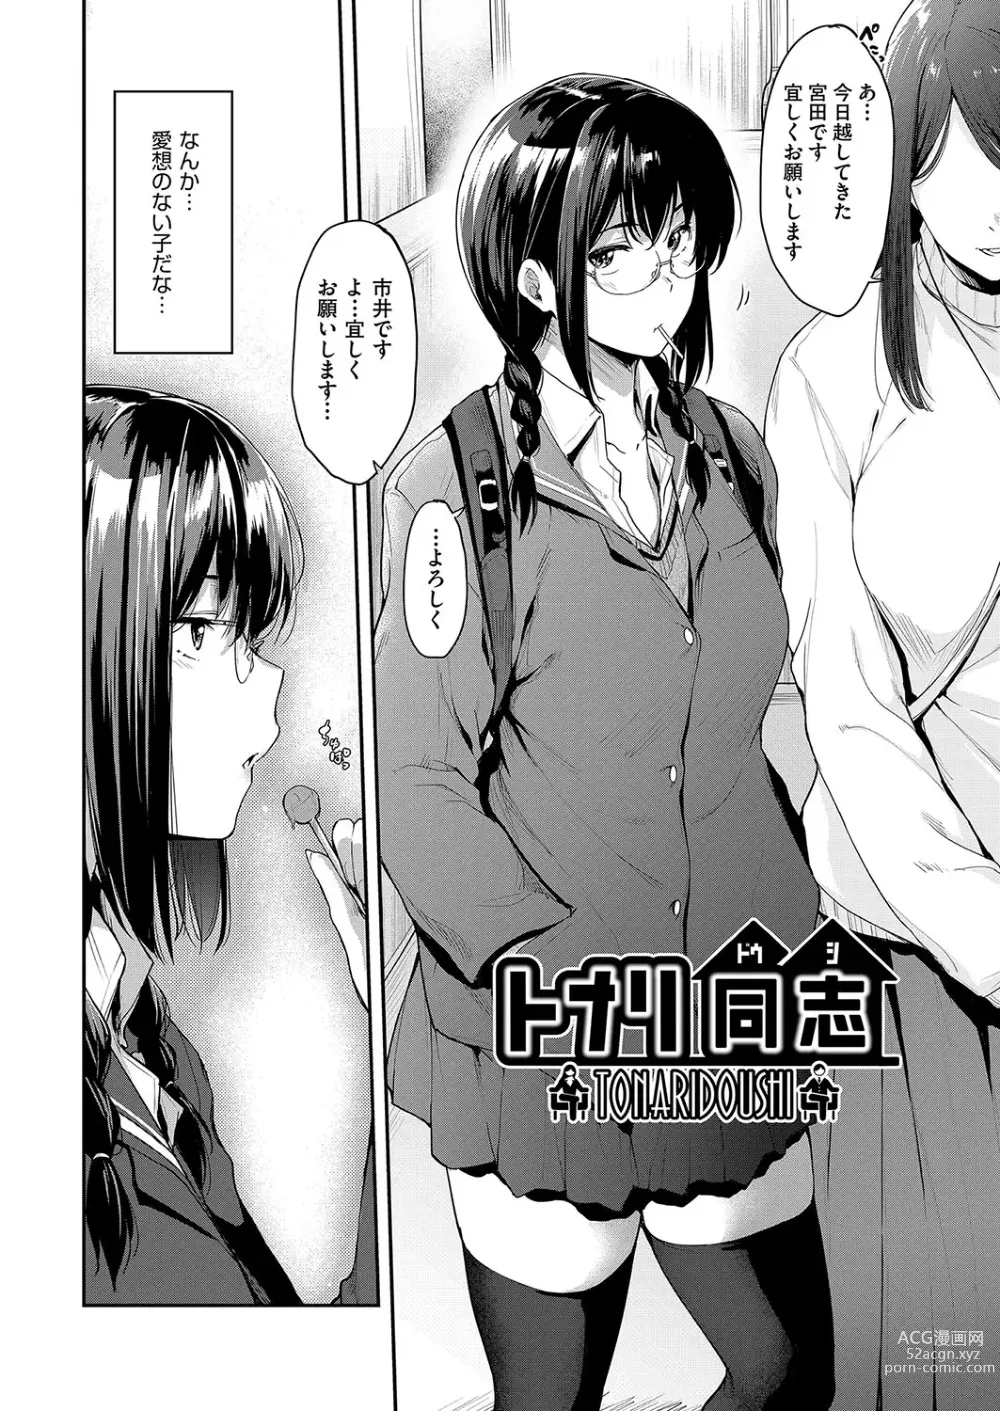 Page 9 of manga Chichi to Megane to Etc - Boobs, glasses and etc...